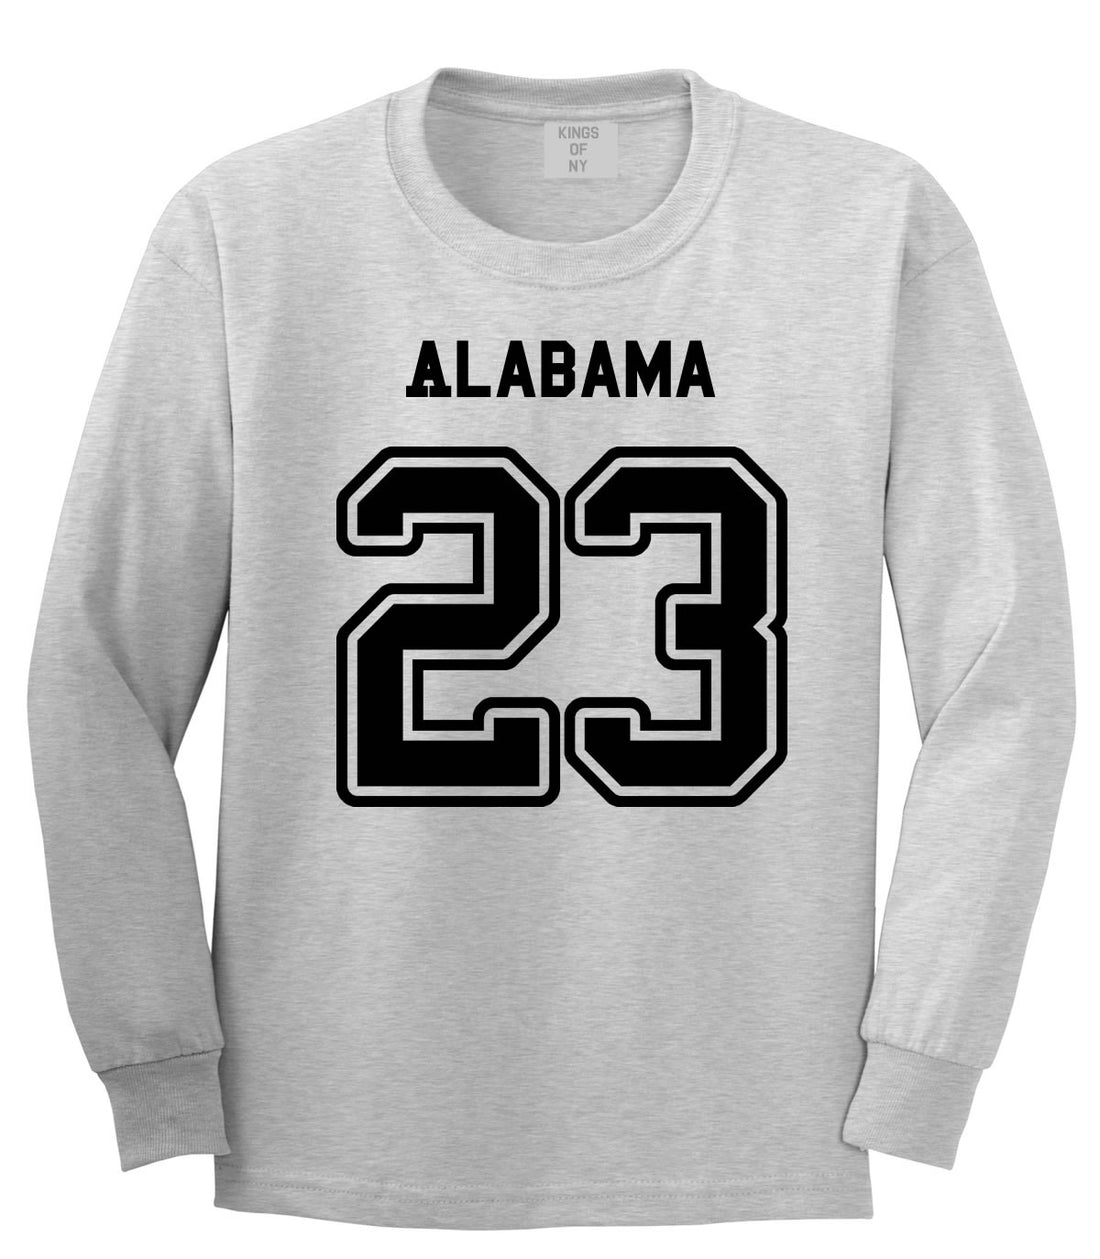 Sport Style Alabama 23 Team State Jersey Long Sleeve T-Shirt By Kings Of NY